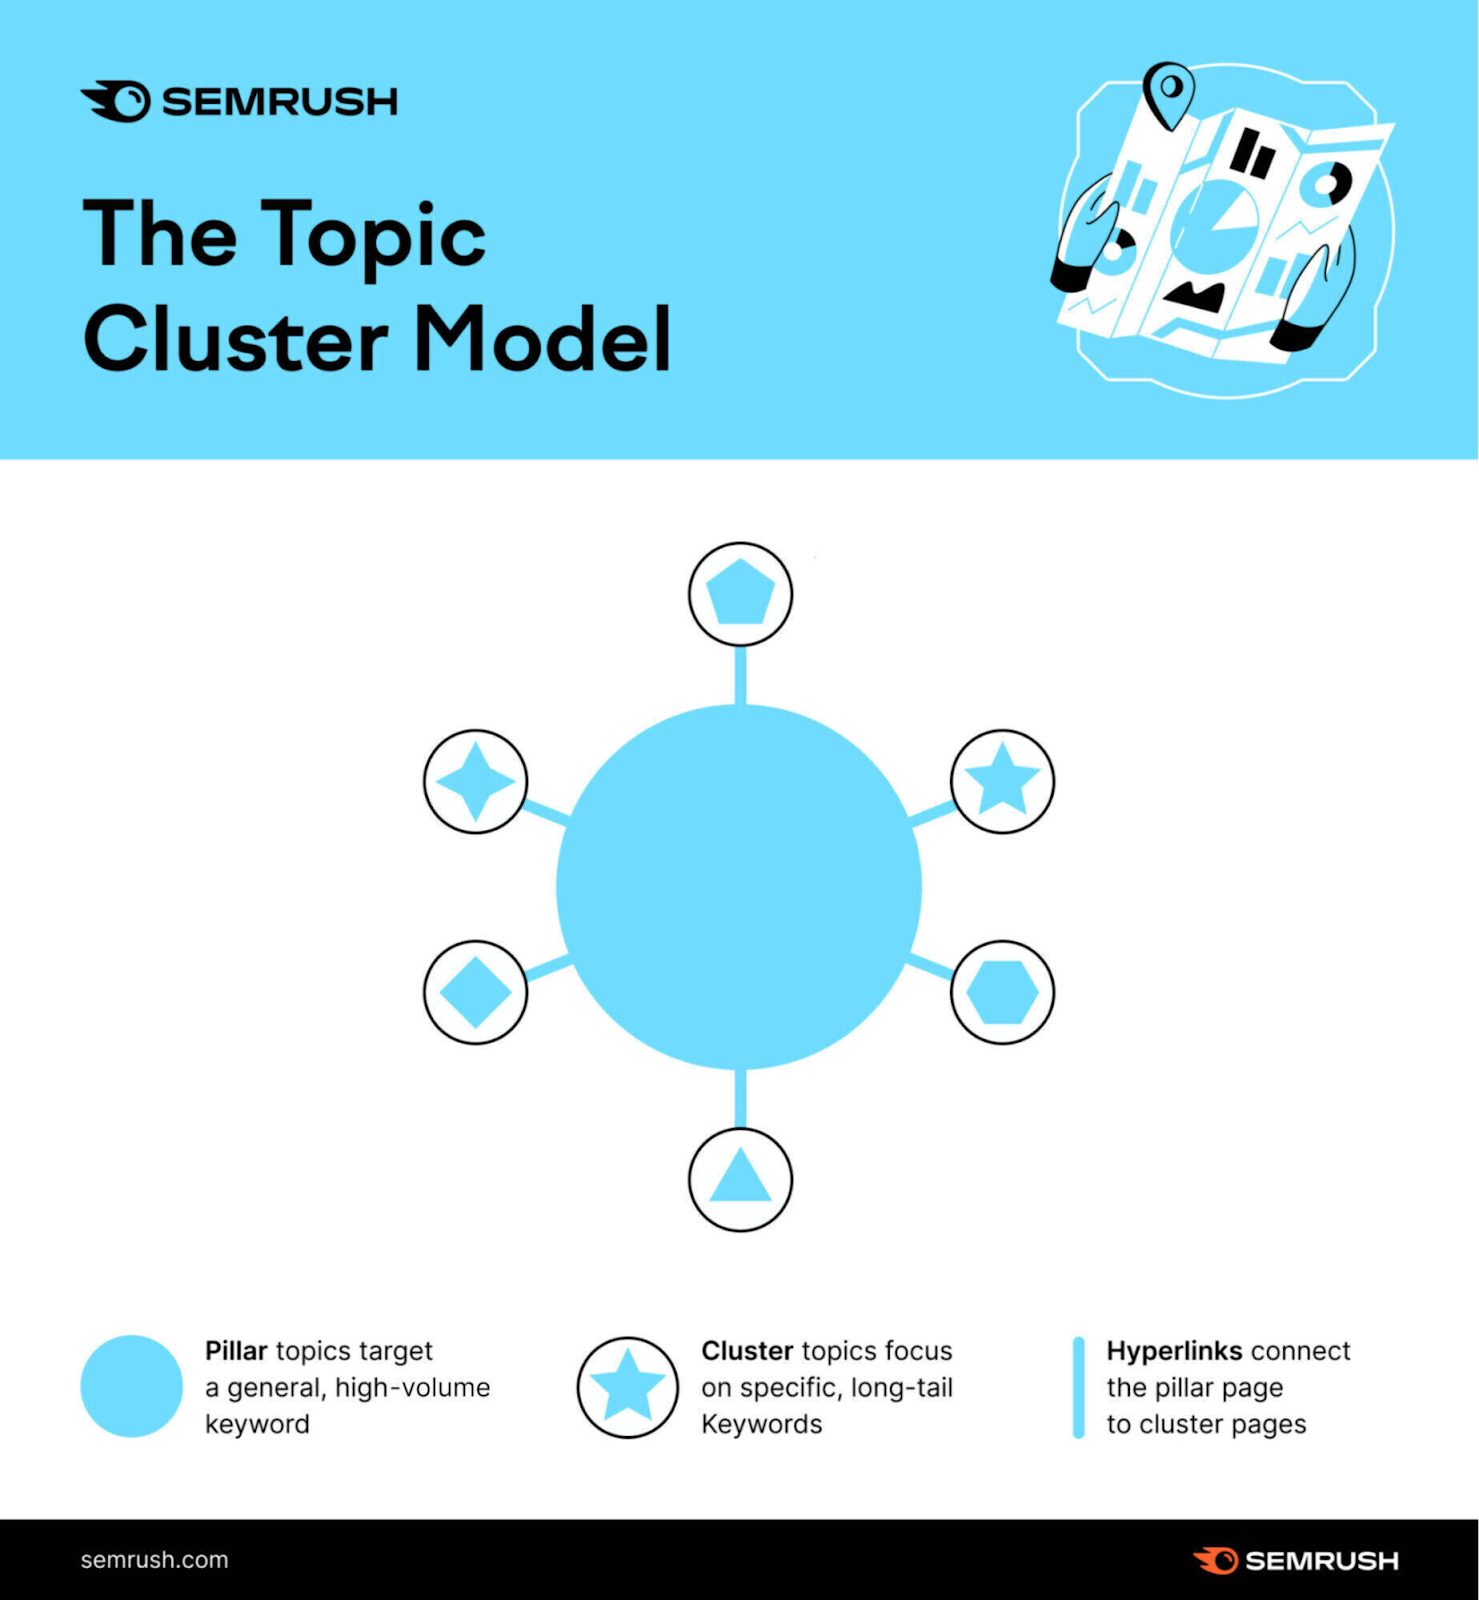 "The Topic Cluster Model" infographic